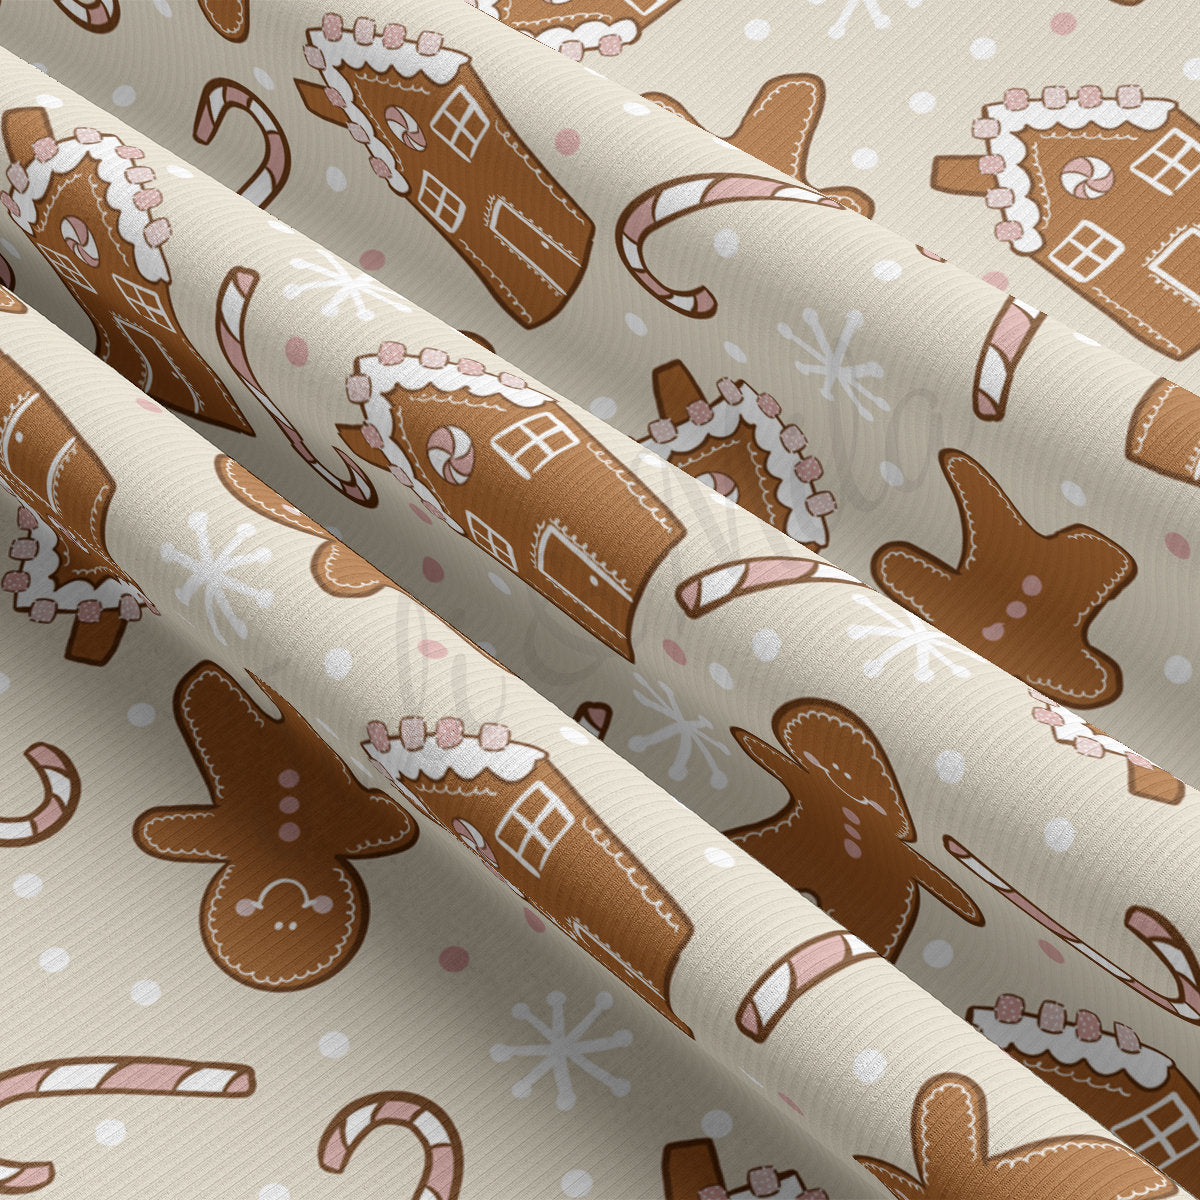 Rib Knit Fabric by the Yard Ribbed Jersey Stretchy Soft Polyester Stretch Fabric 1 Yard  RBK2117 Christmas